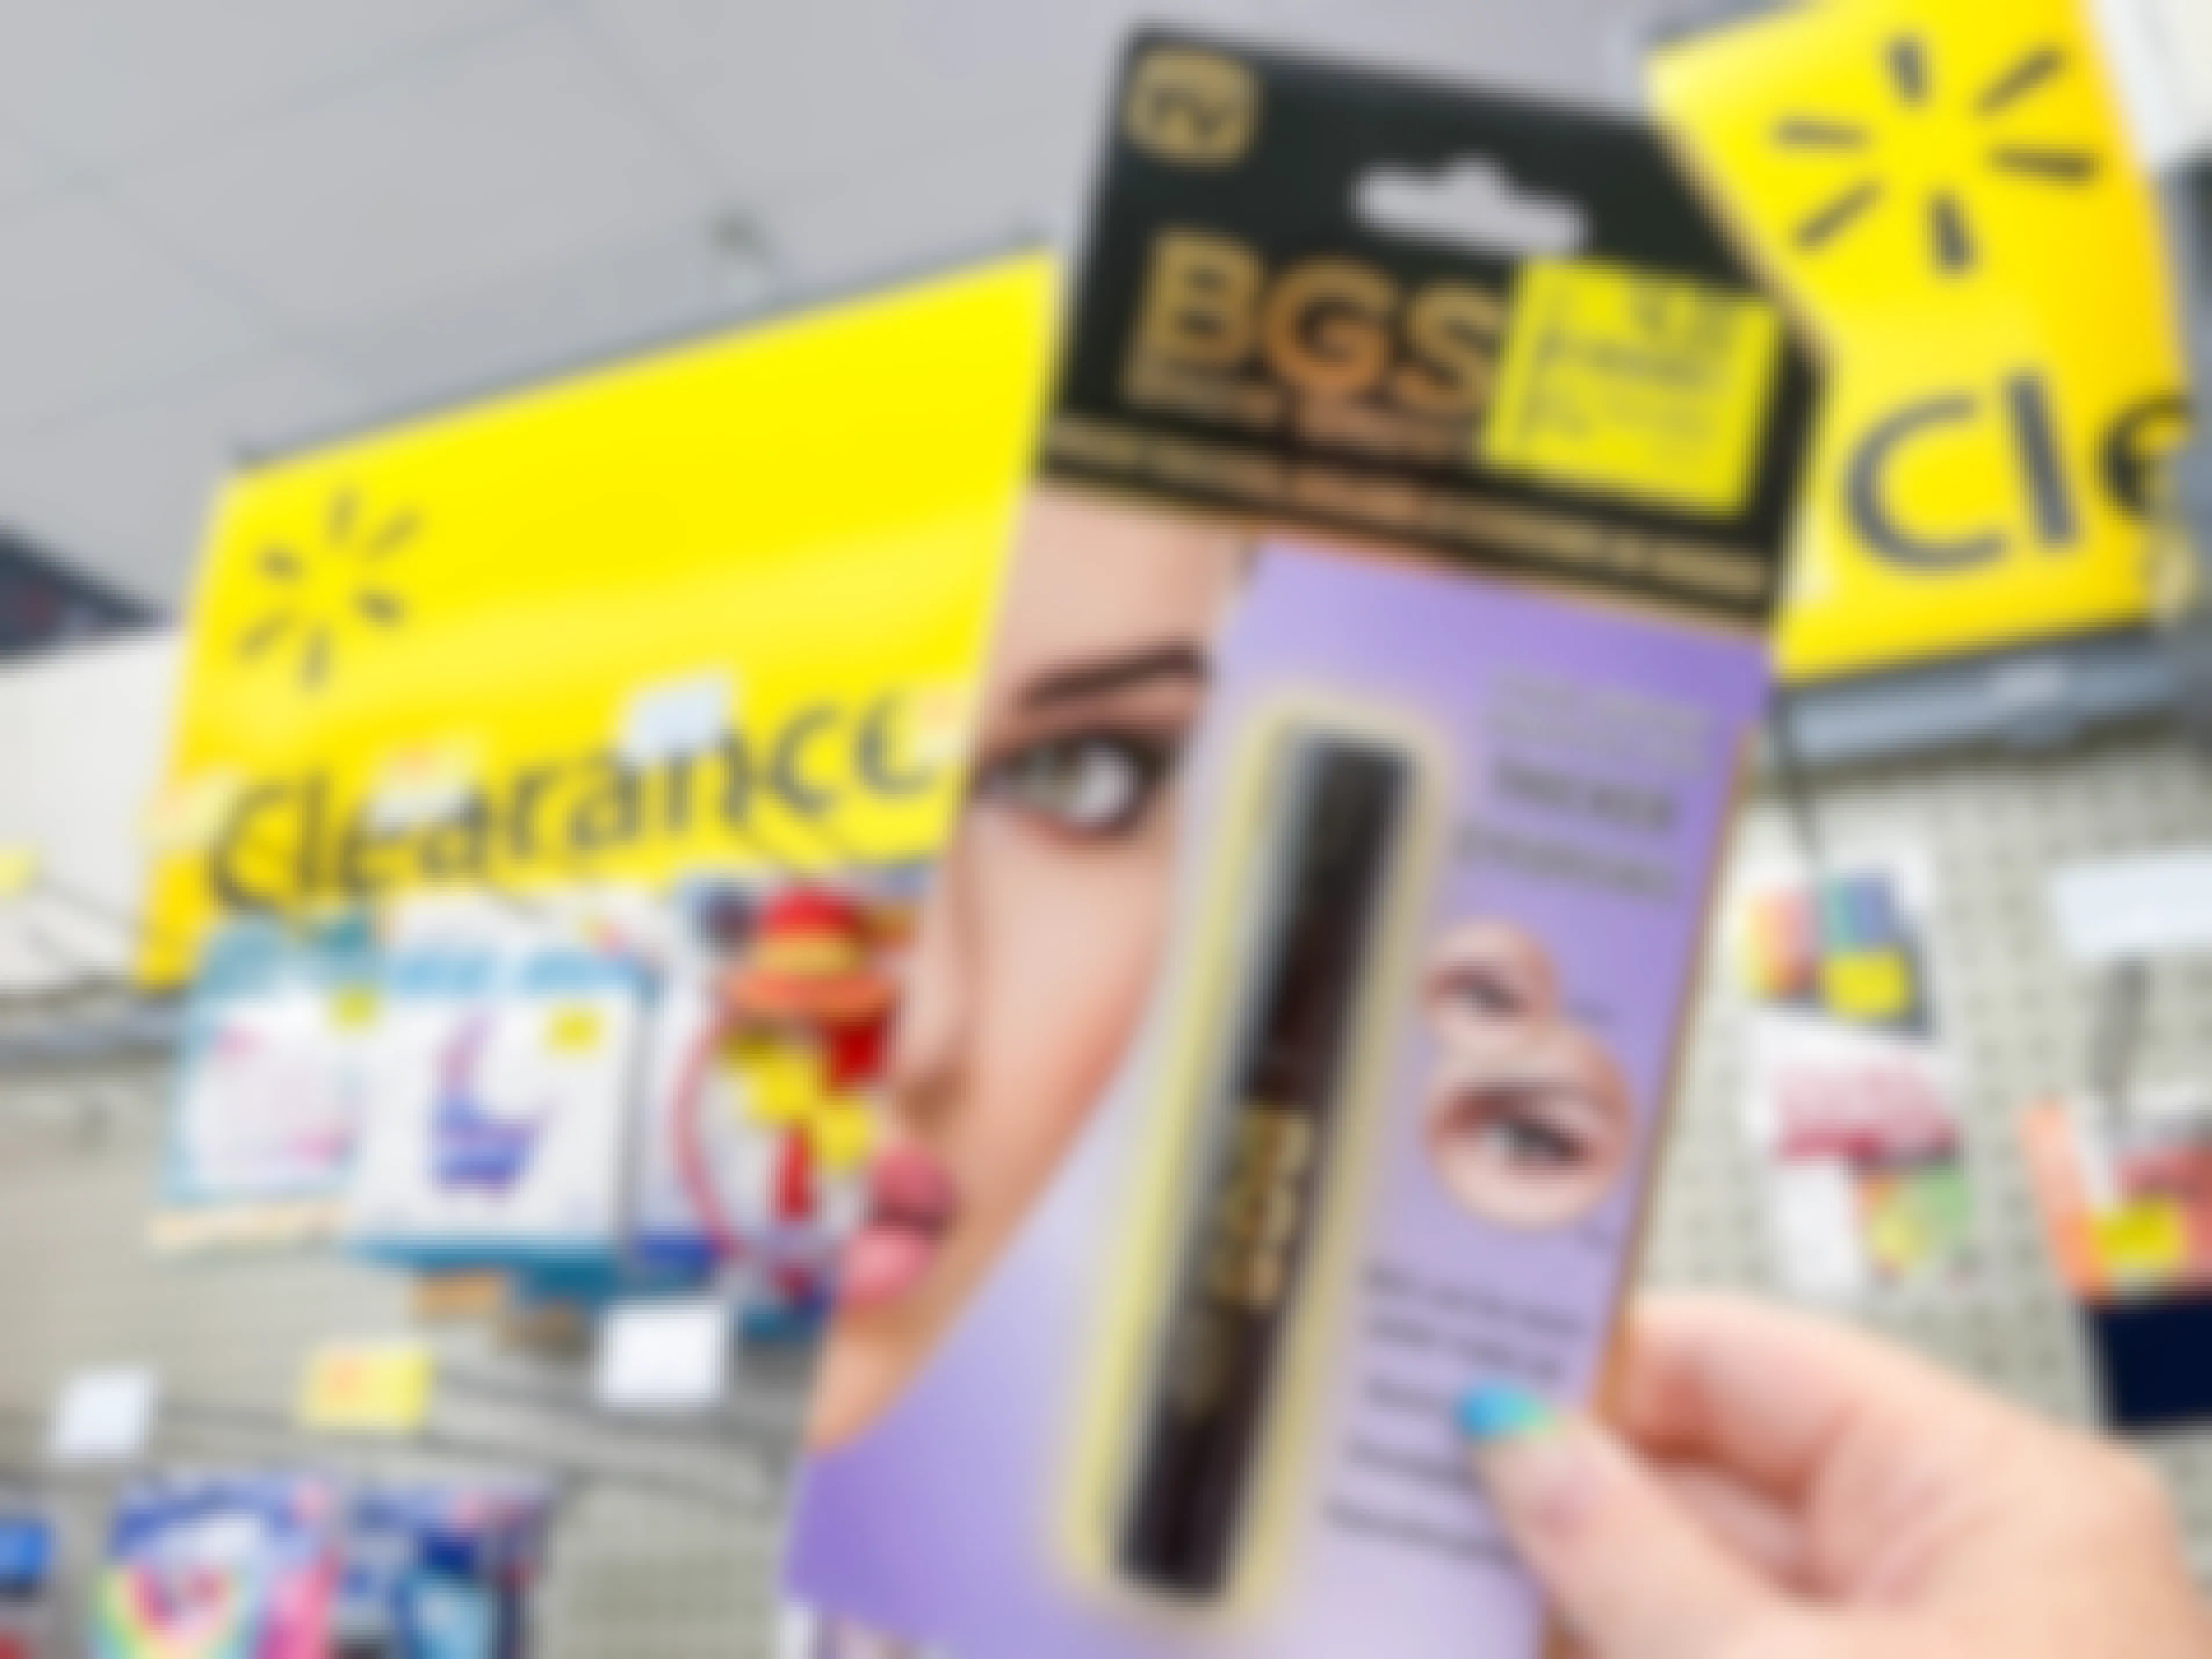 A person holding up clearance makeup product in front of a yellow sign that reads "clearance".